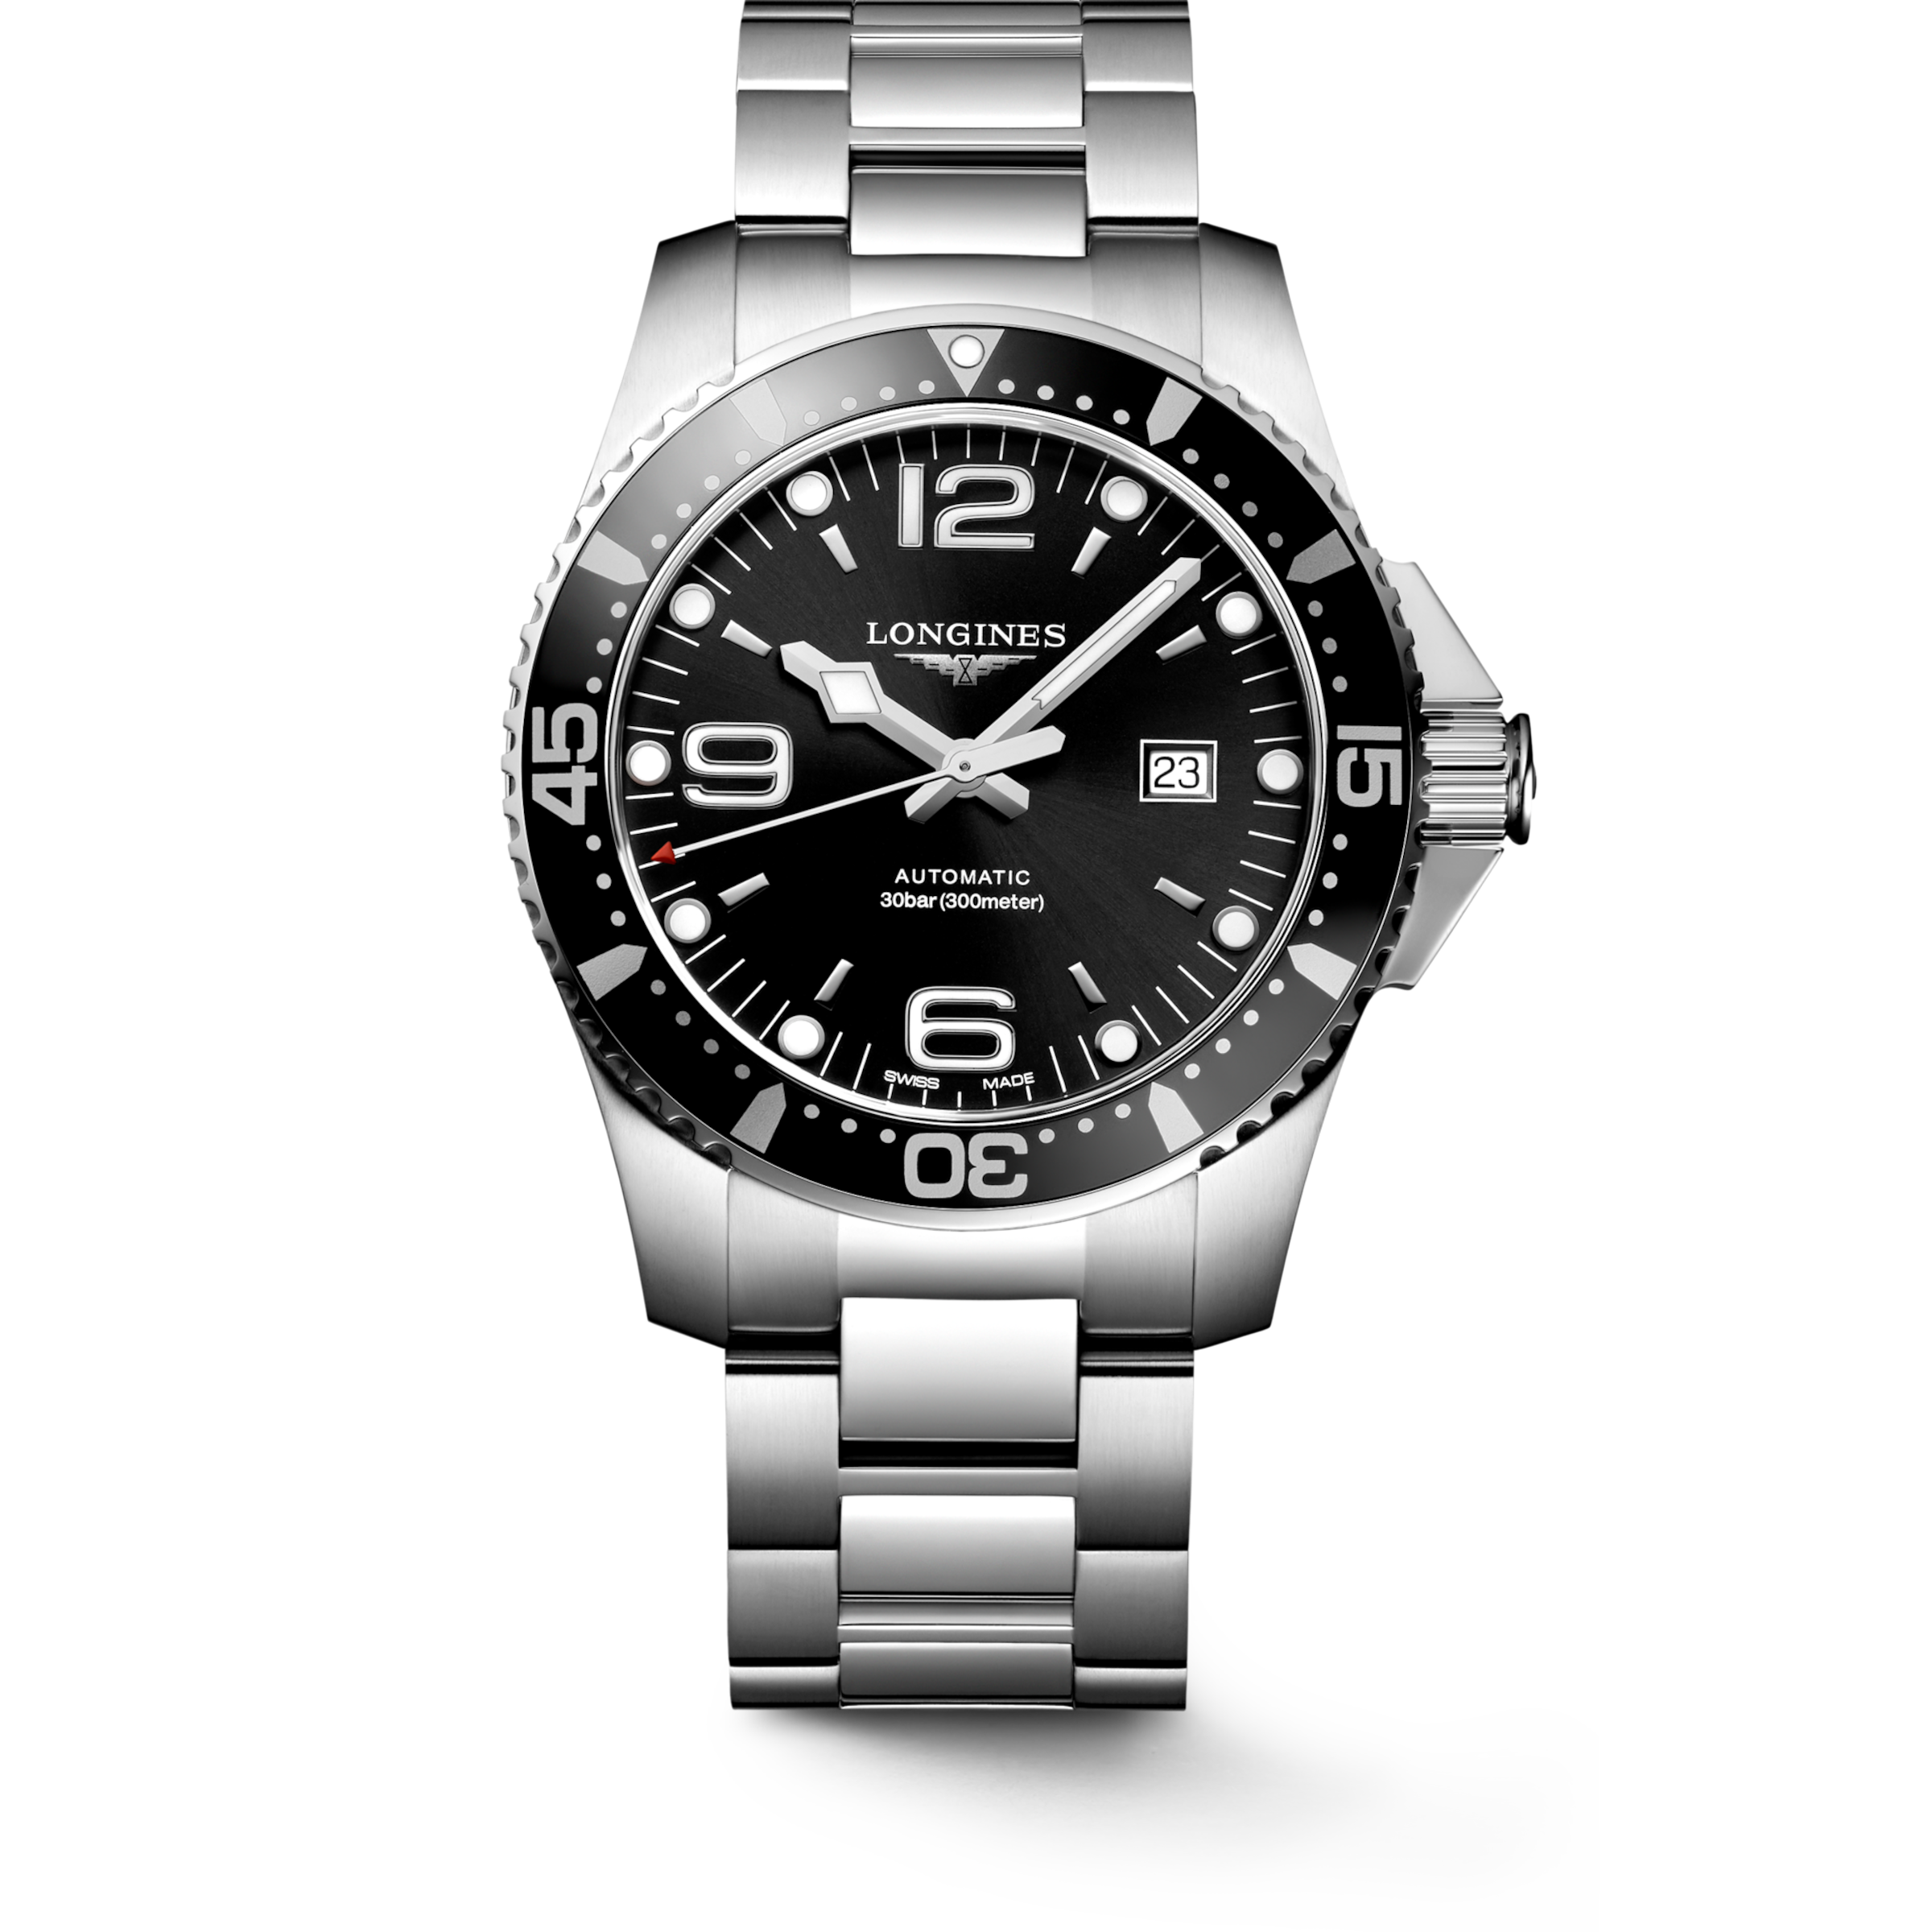 Longines HYDROCONQUEST Automatic Stainless steel Watch - L3.841.4.56.6